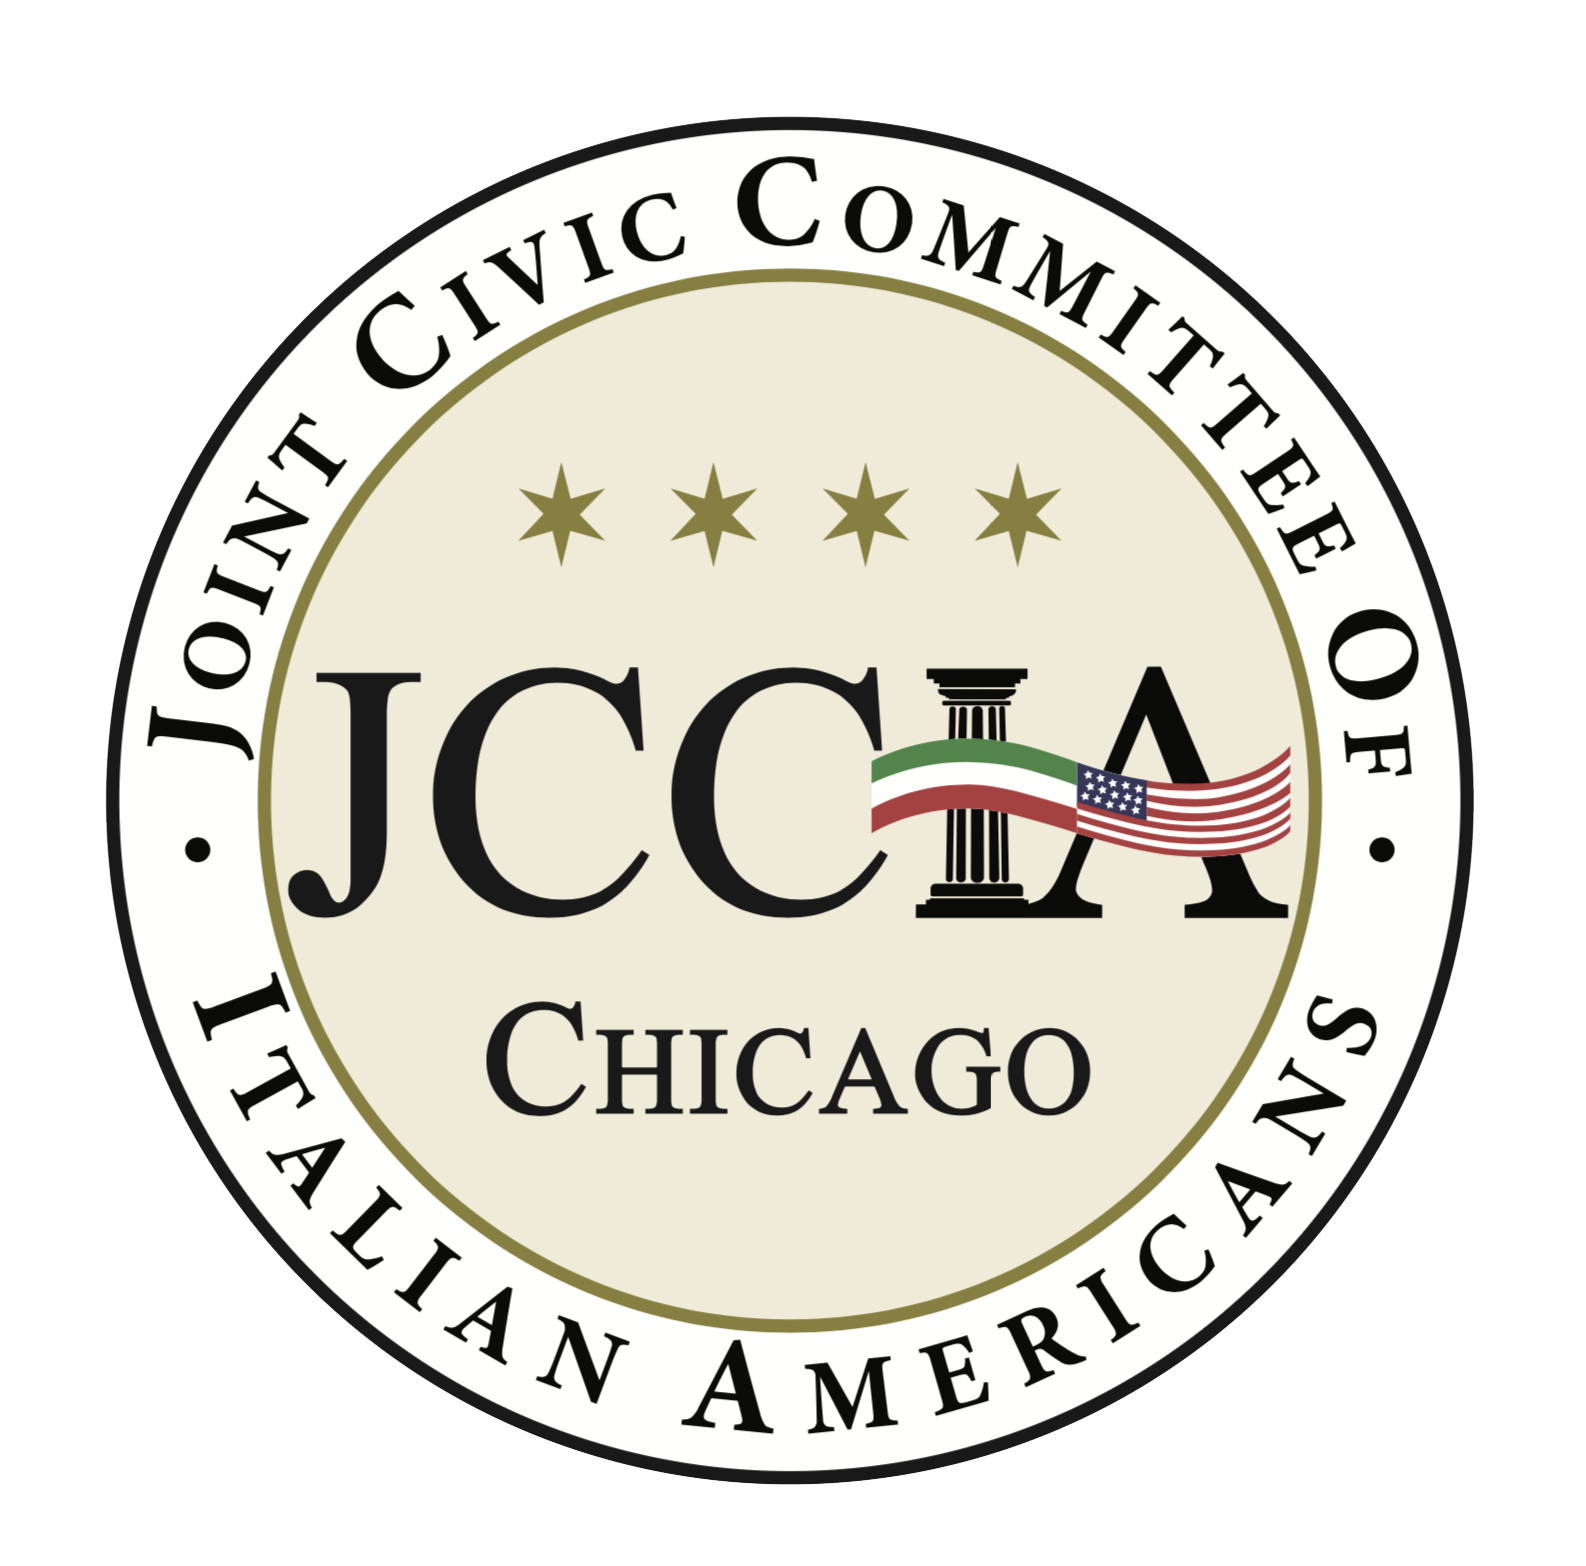 Joint Civic Committee of Italian Americans to File Suit Against Chicago Park District